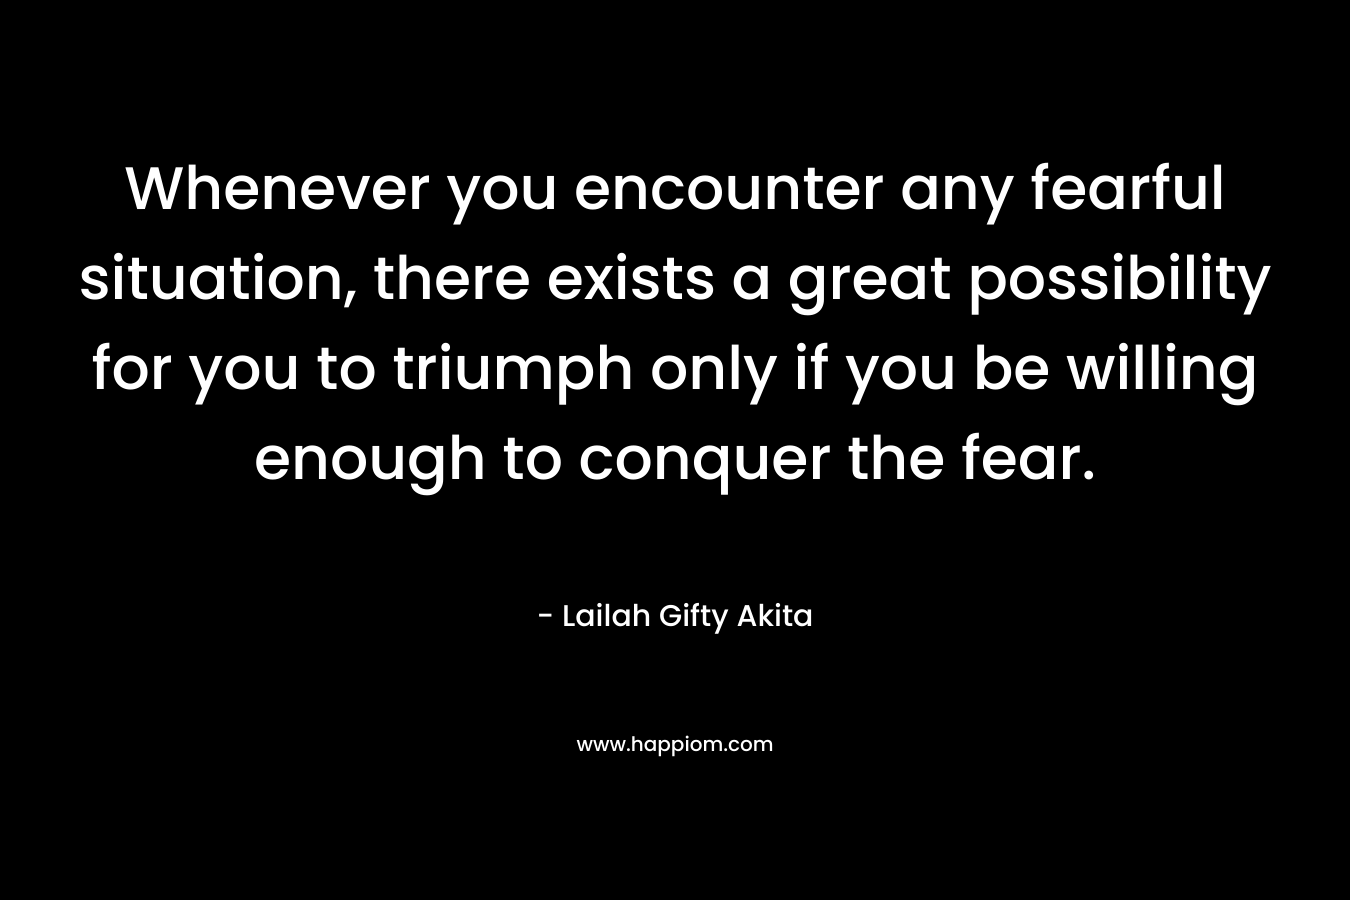 Whenever you encounter any fearful situation, there exists a great possibility for you to triumph only if you be willing enough to conquer the fear.